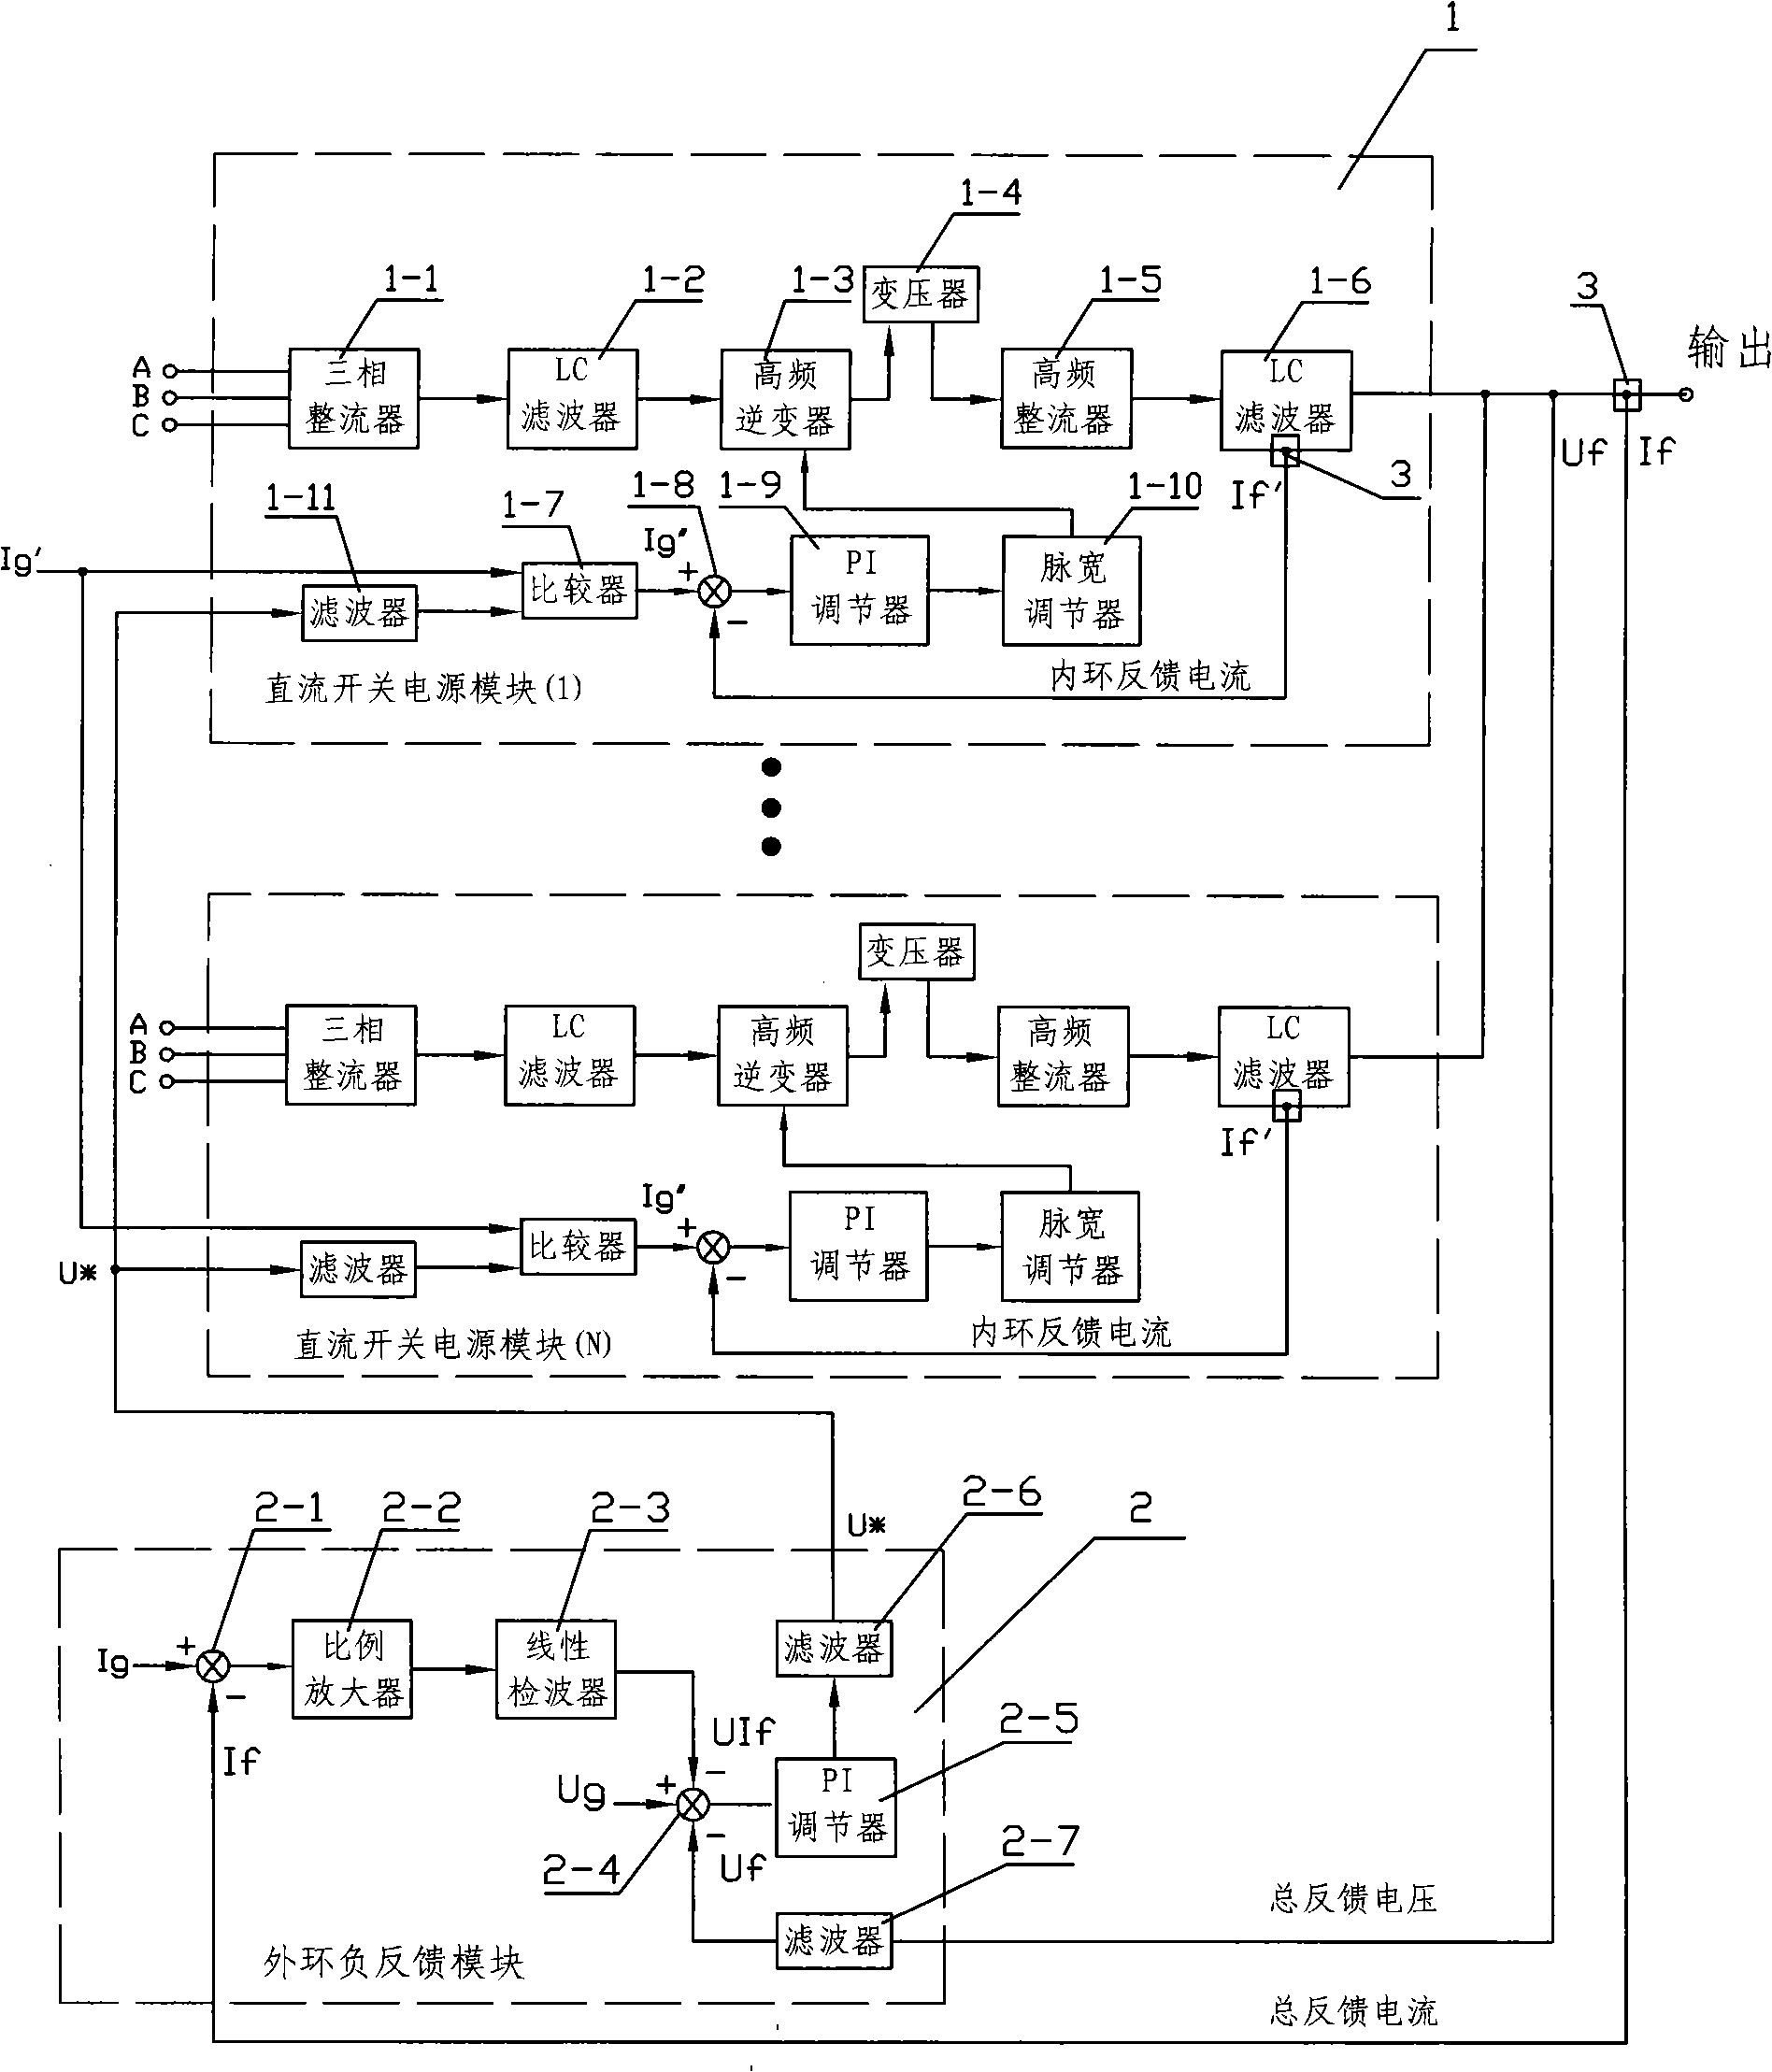 Modular parallel great power DC power source switch apparatus